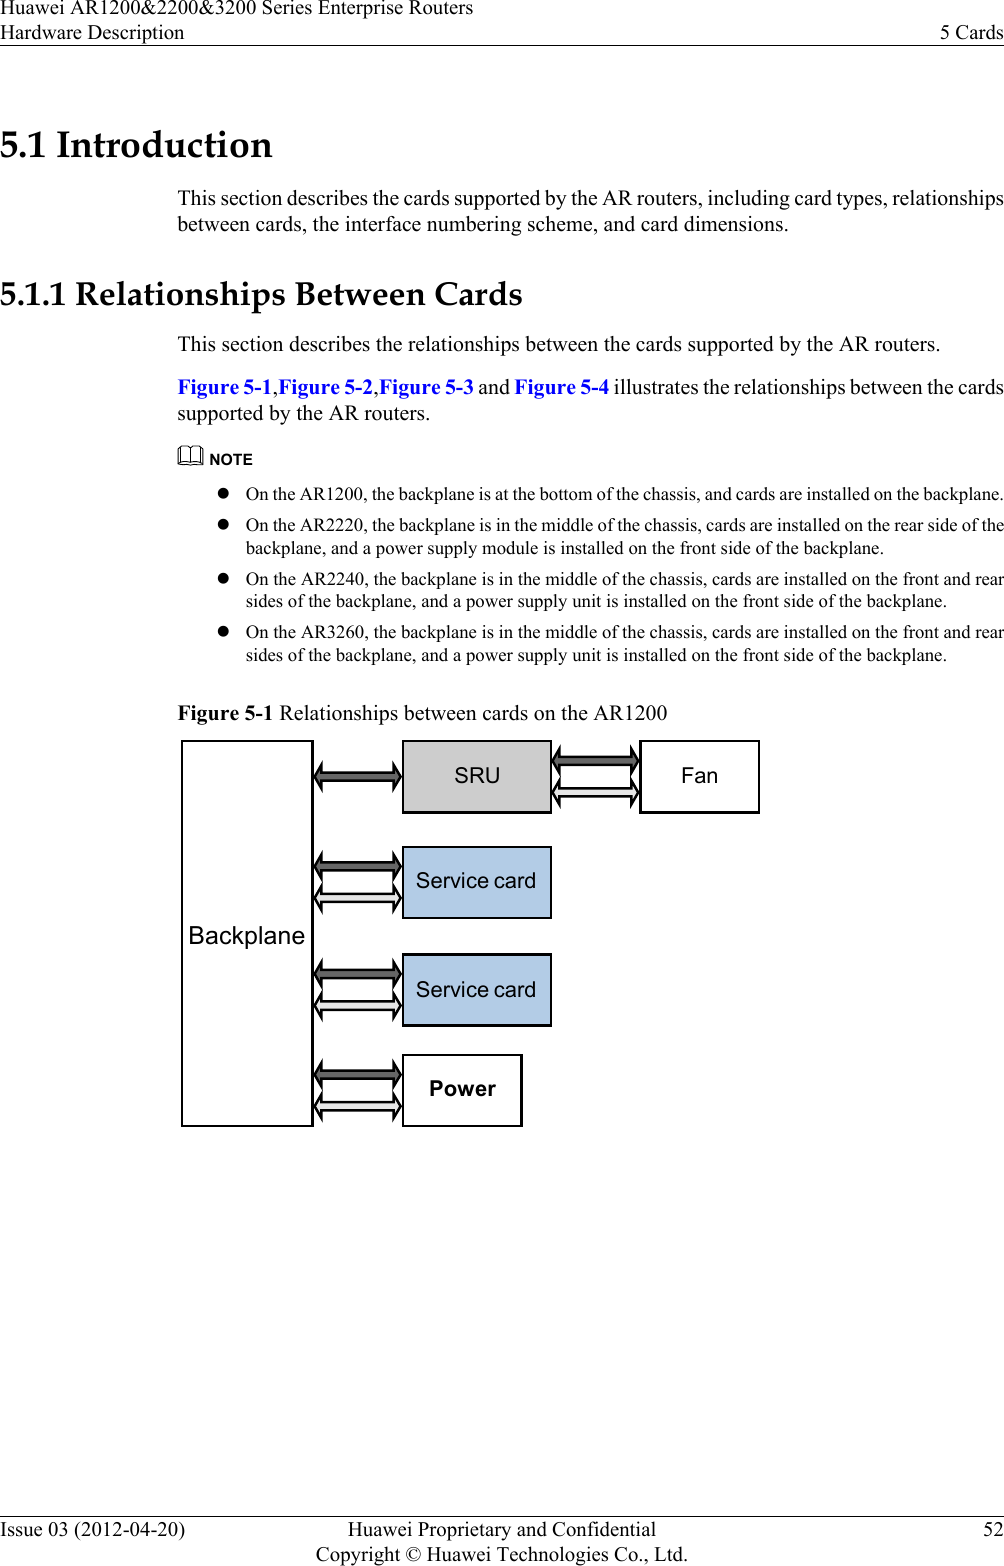 5.1 IntroductionThis section describes the cards supported by the AR routers, including card types, relationshipsbetween cards, the interface numbering scheme, and card dimensions.5.1.1 Relationships Between CardsThis section describes the relationships between the cards supported by the AR routers.Figure 5-1,Figure 5-2,Figure 5-3 and Figure 5-4 illustrates the relationships between the cardssupported by the AR routers.NOTElOn the AR1200, the backplane is at the bottom of the chassis, and cards are installed on the backplane.lOn the AR2220, the backplane is in the middle of the chassis, cards are installed on the rear side of thebackplane, and a power supply module is installed on the front side of the backplane.lOn the AR2240, the backplane is in the middle of the chassis, cards are installed on the front and rearsides of the backplane, and a power supply unit is installed on the front side of the backplane.lOn the AR3260, the backplane is in the middle of the chassis, cards are installed on the front and rearsides of the backplane, and a power supply unit is installed on the front side of the backplane.Figure 5-1 Relationships between cards on the AR1200Service cardPowerBackplaneSRU FanService card Huawei AR1200&amp;2200&amp;3200 Series Enterprise RoutersHardware Description 5 CardsIssue 03 (2012-04-20) Huawei Proprietary and ConfidentialCopyright © Huawei Technologies Co., Ltd.52